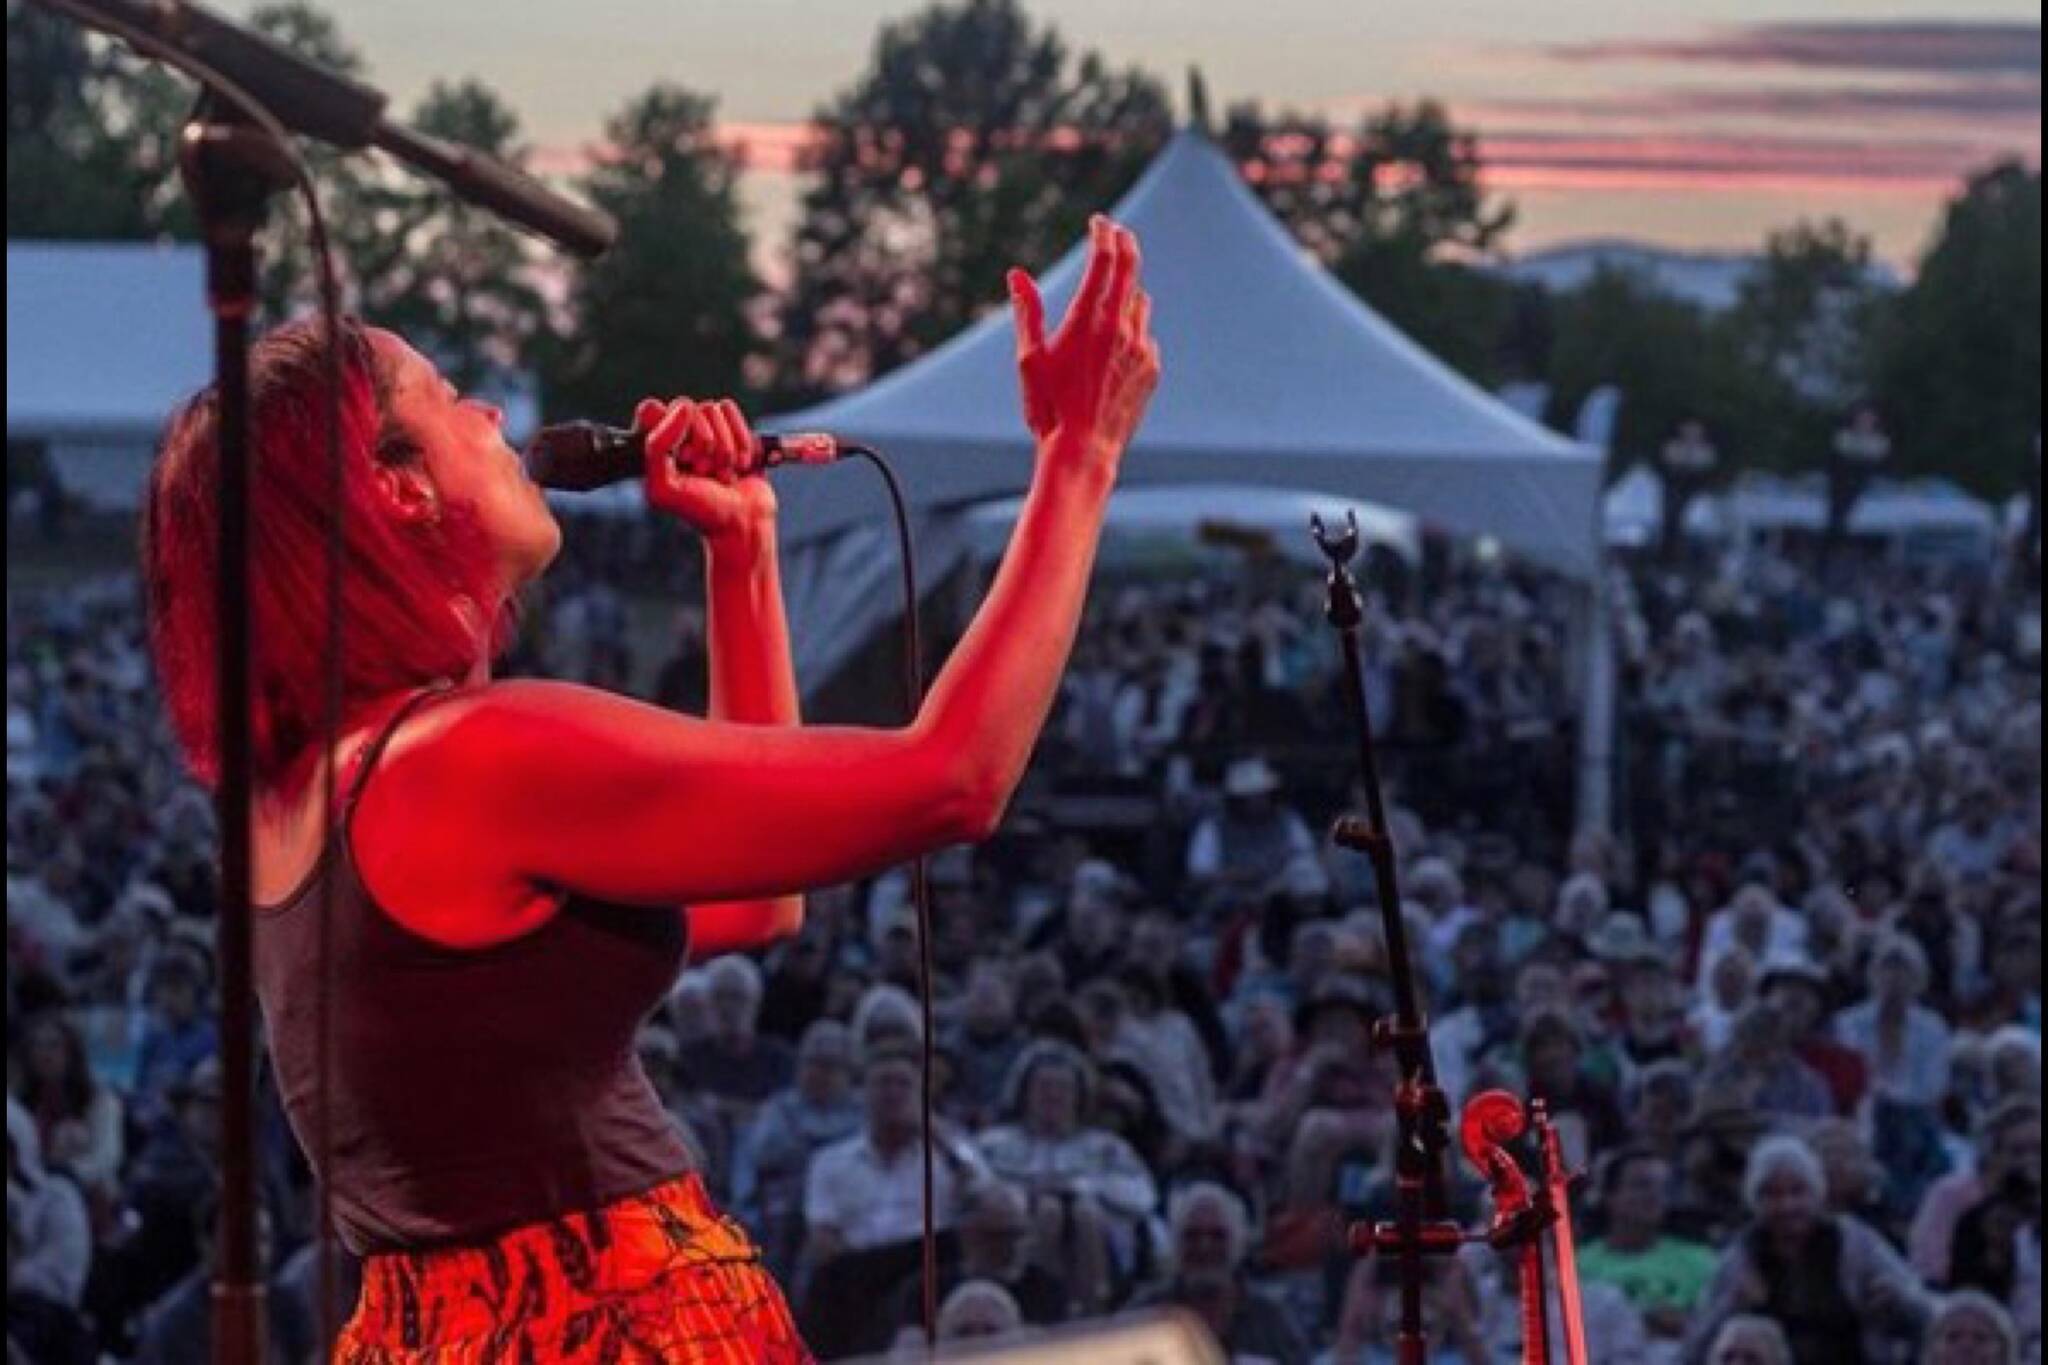 Vancouver Folk Music Festival organizers say they don’t have the funds to run the annual event in 2023. They’ll ask their membership on Feb. 1 to vote on whether to end the festival forever. (Vancouver Folk Music Festival/Instagram)